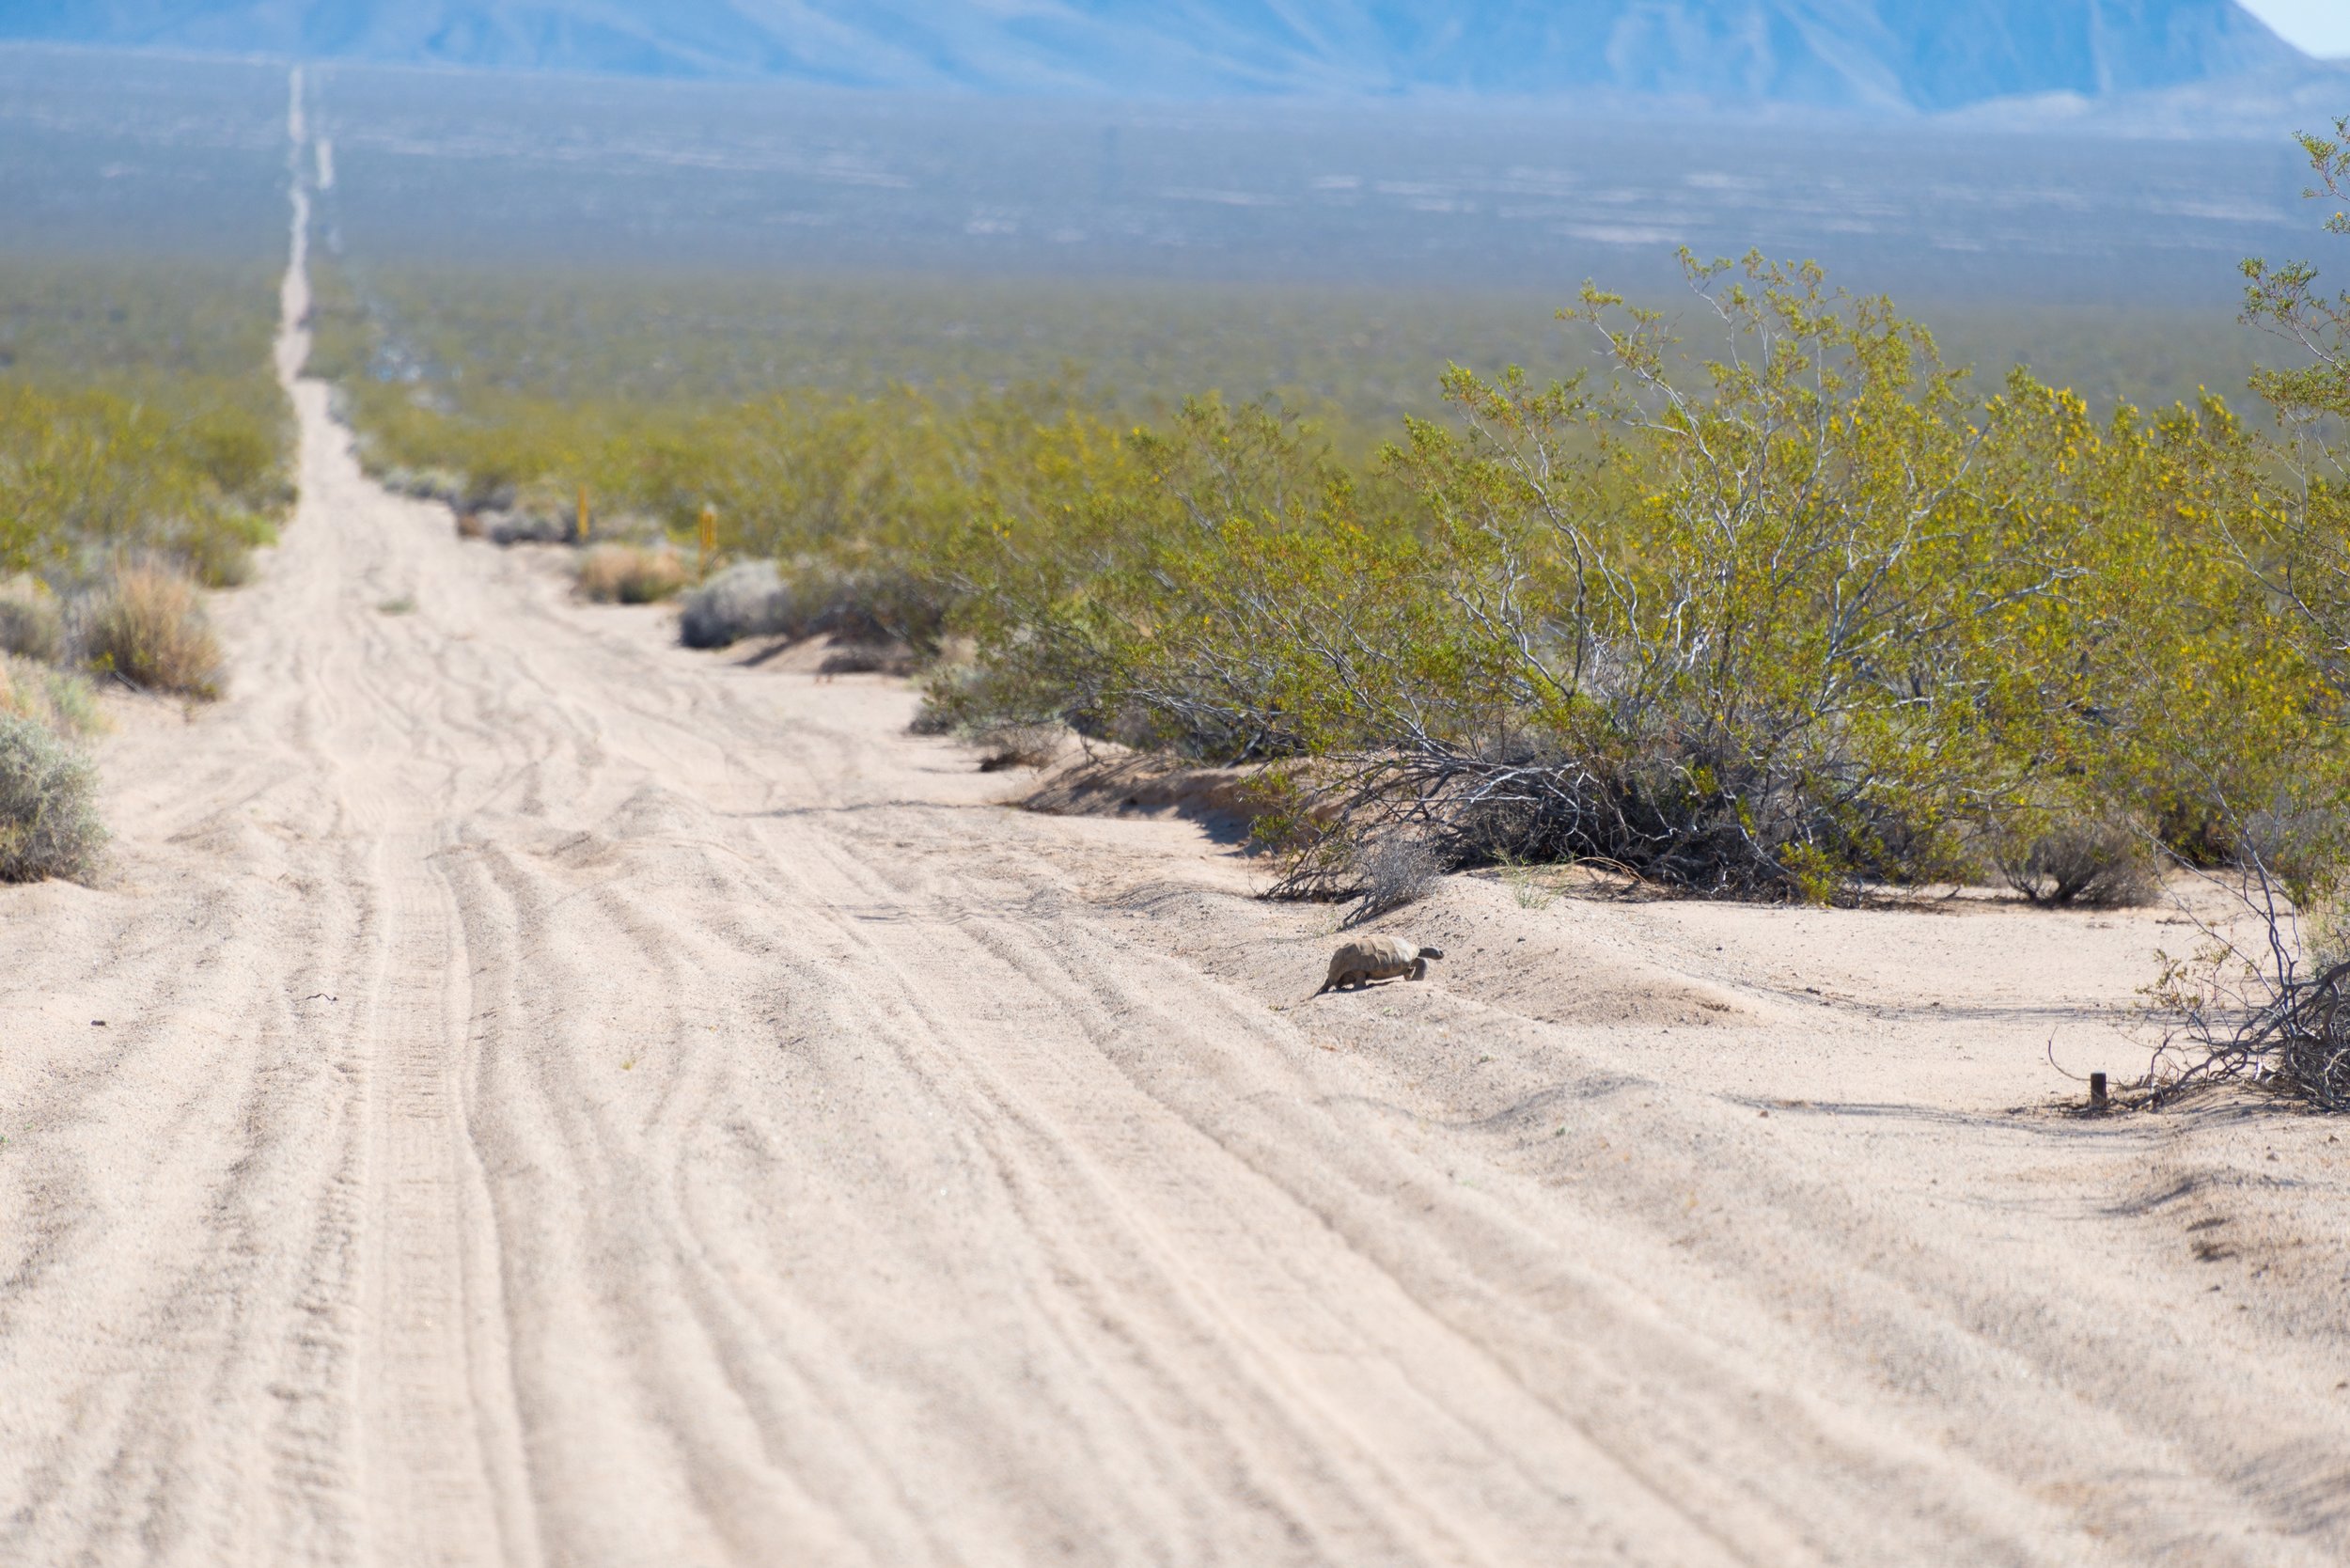 A tortoise makes it across a quiet dirt road in Mojave Trails National Monument.